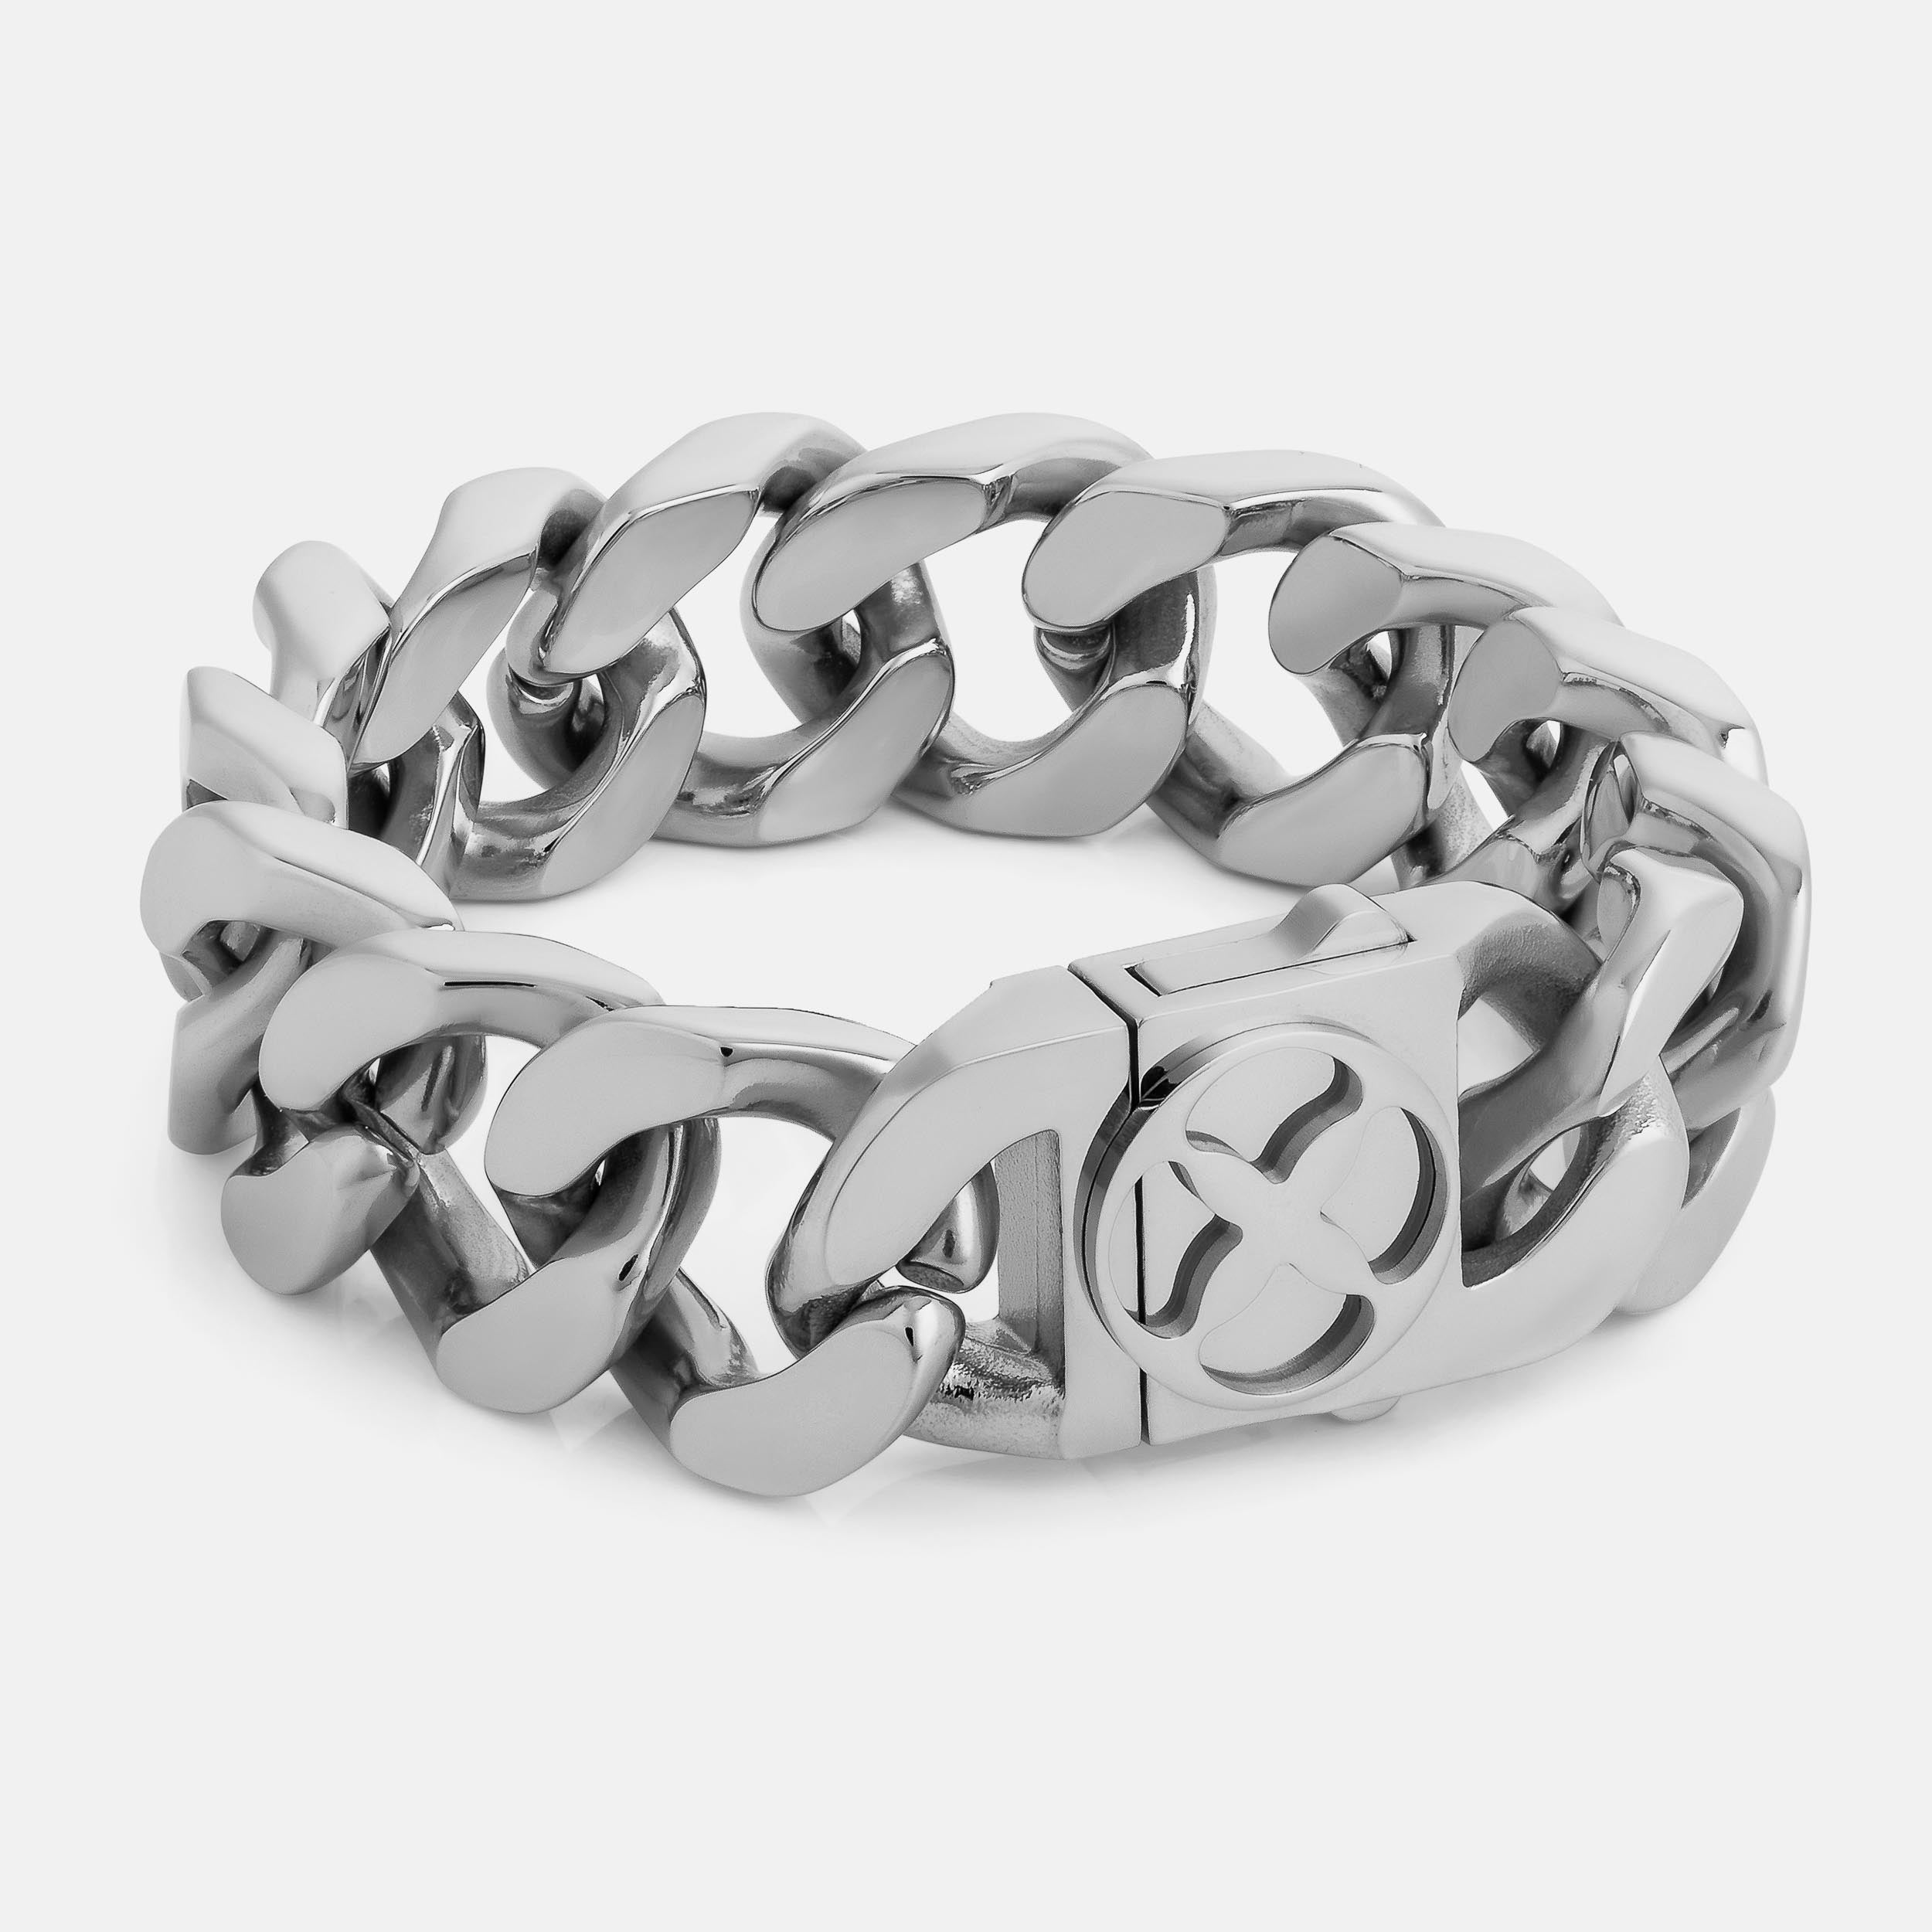 Vitaly Integer Bracelet | 100% Recycled Stainless Steel Accessories